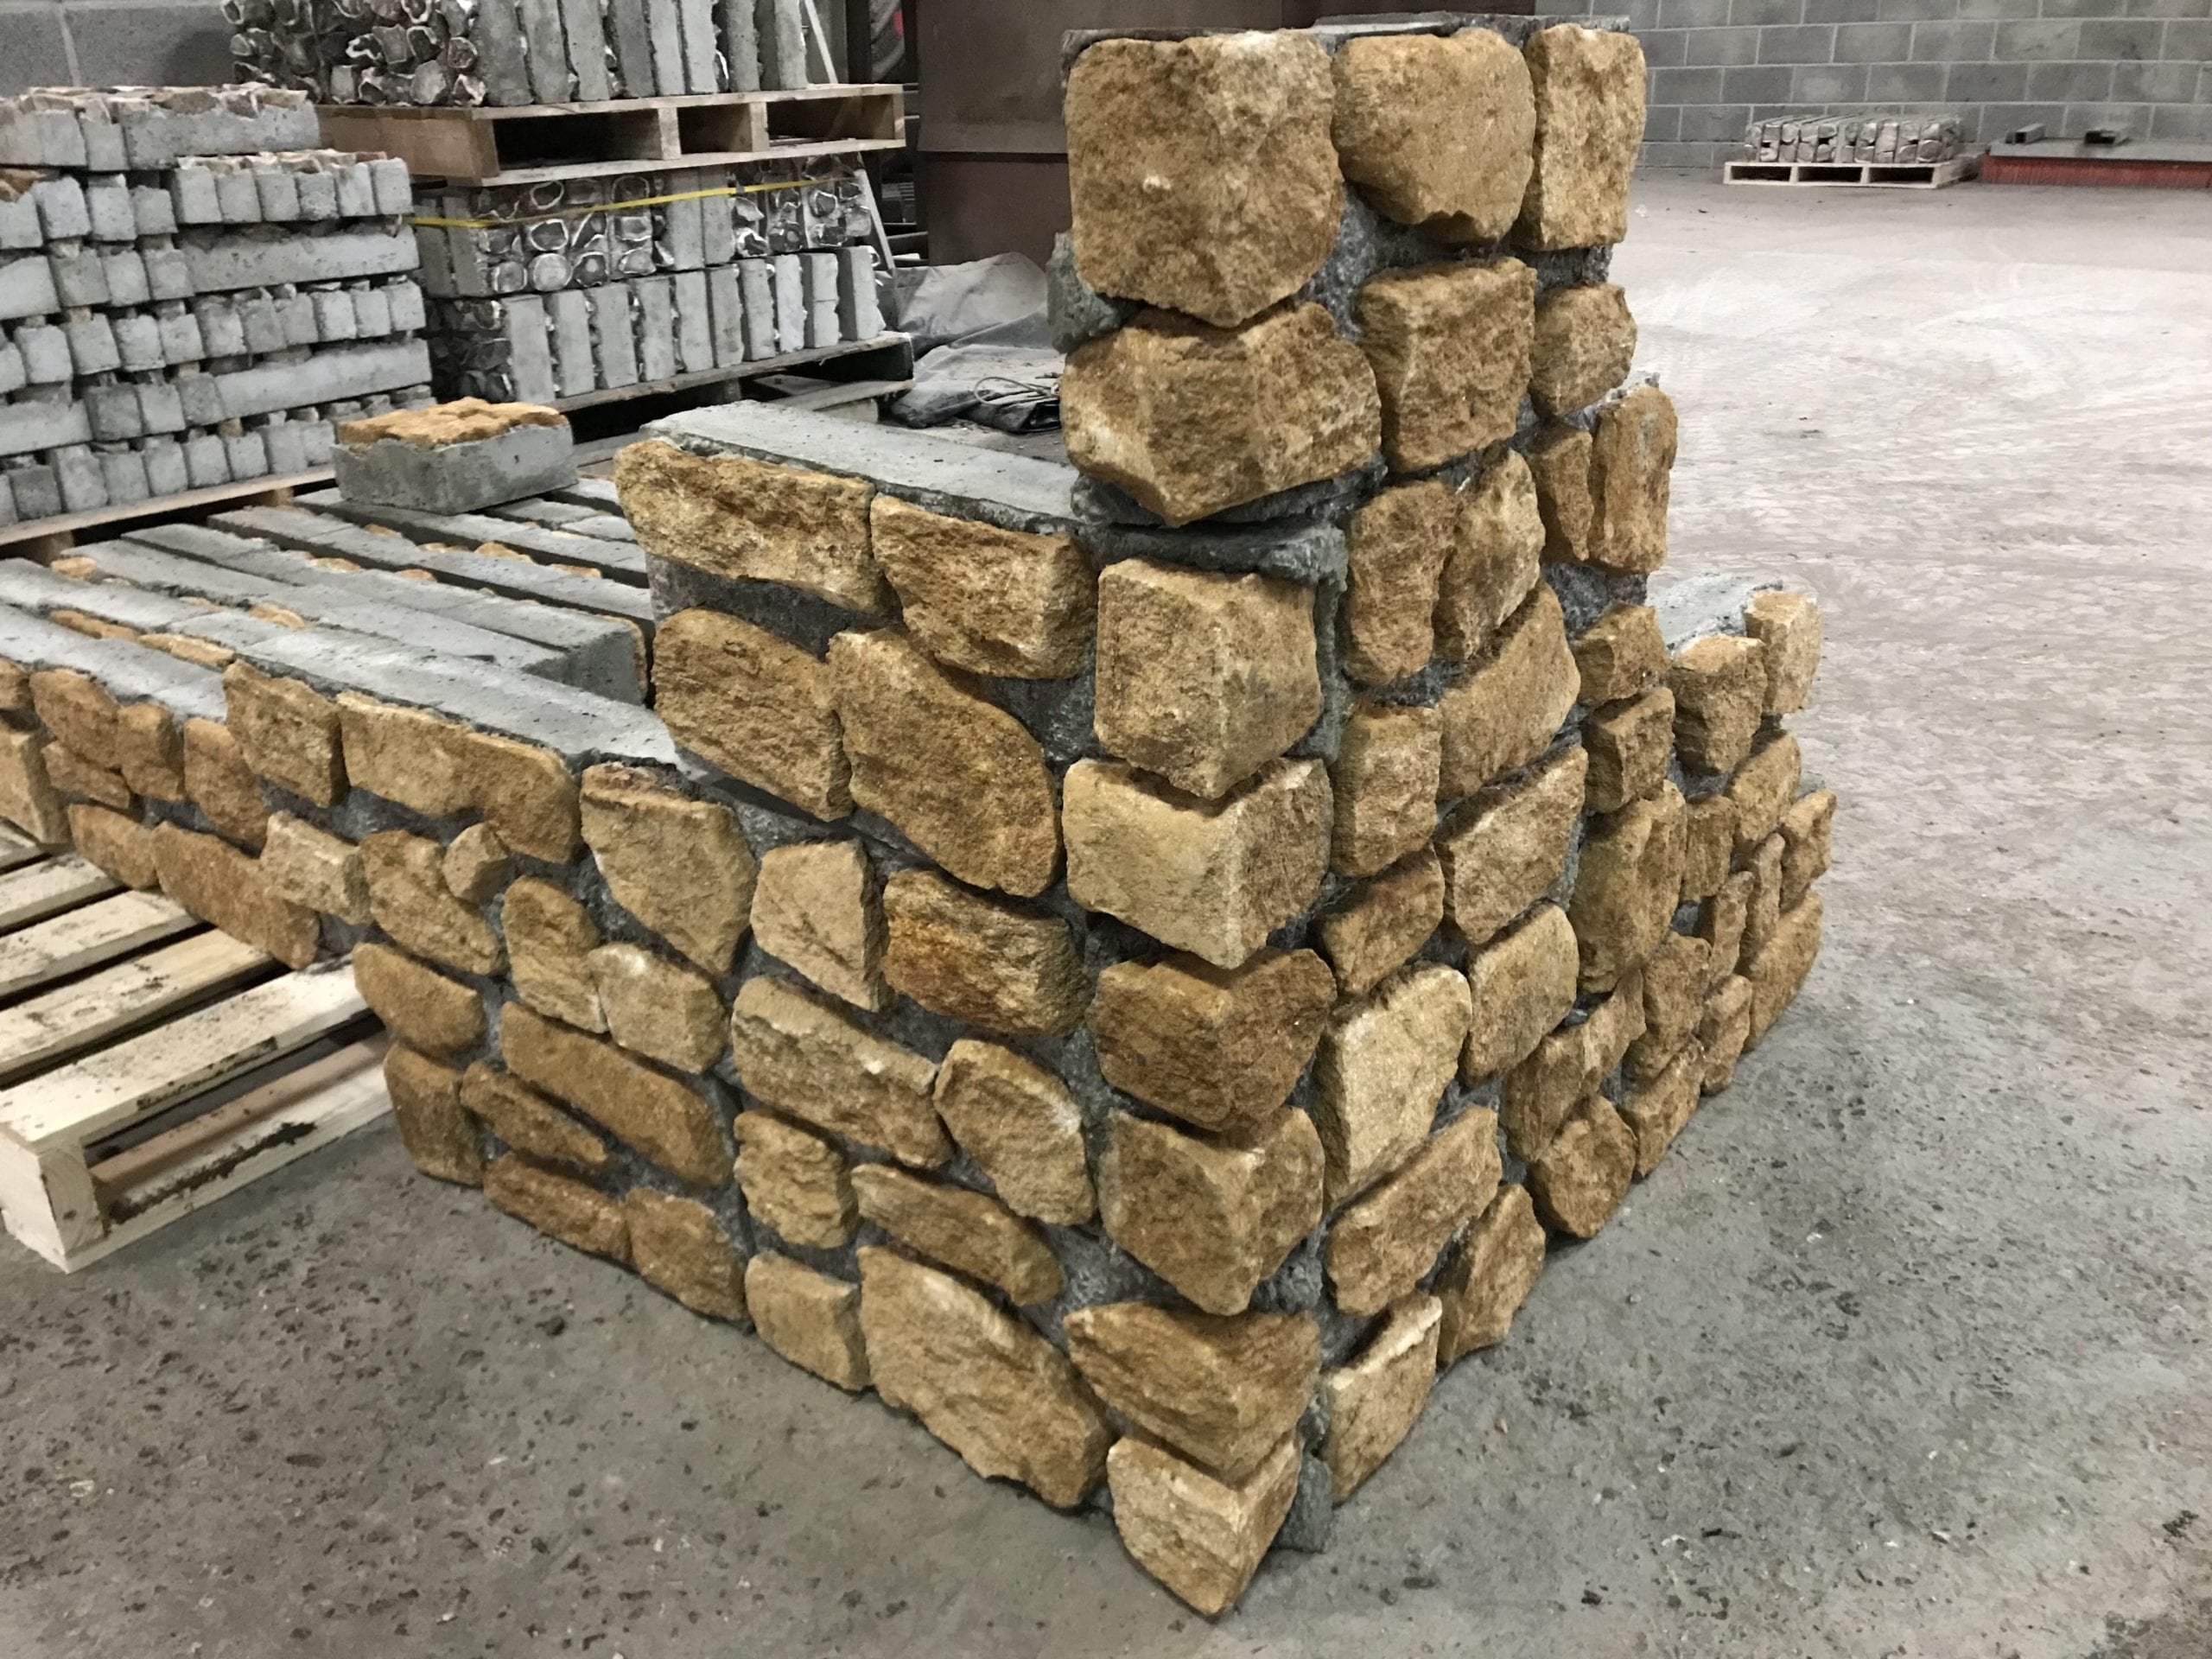 Ham stone blocks stacked up on top of each other.